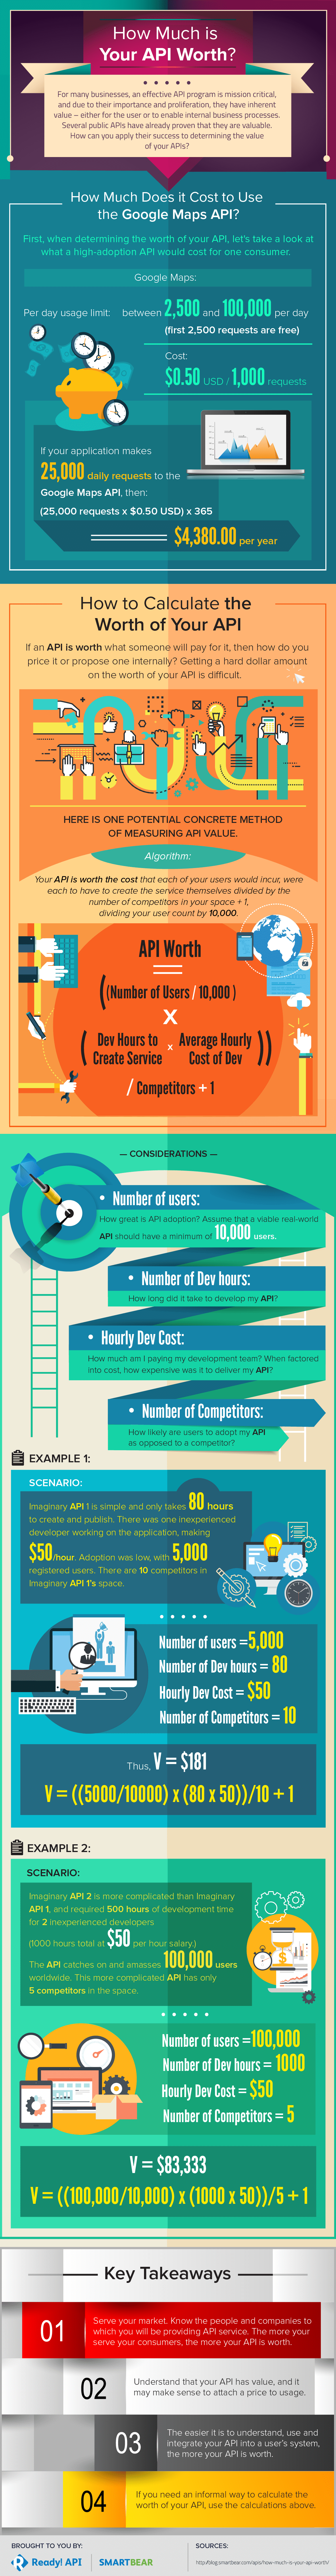 How-Much-is-Your-API-Worth_Infographic